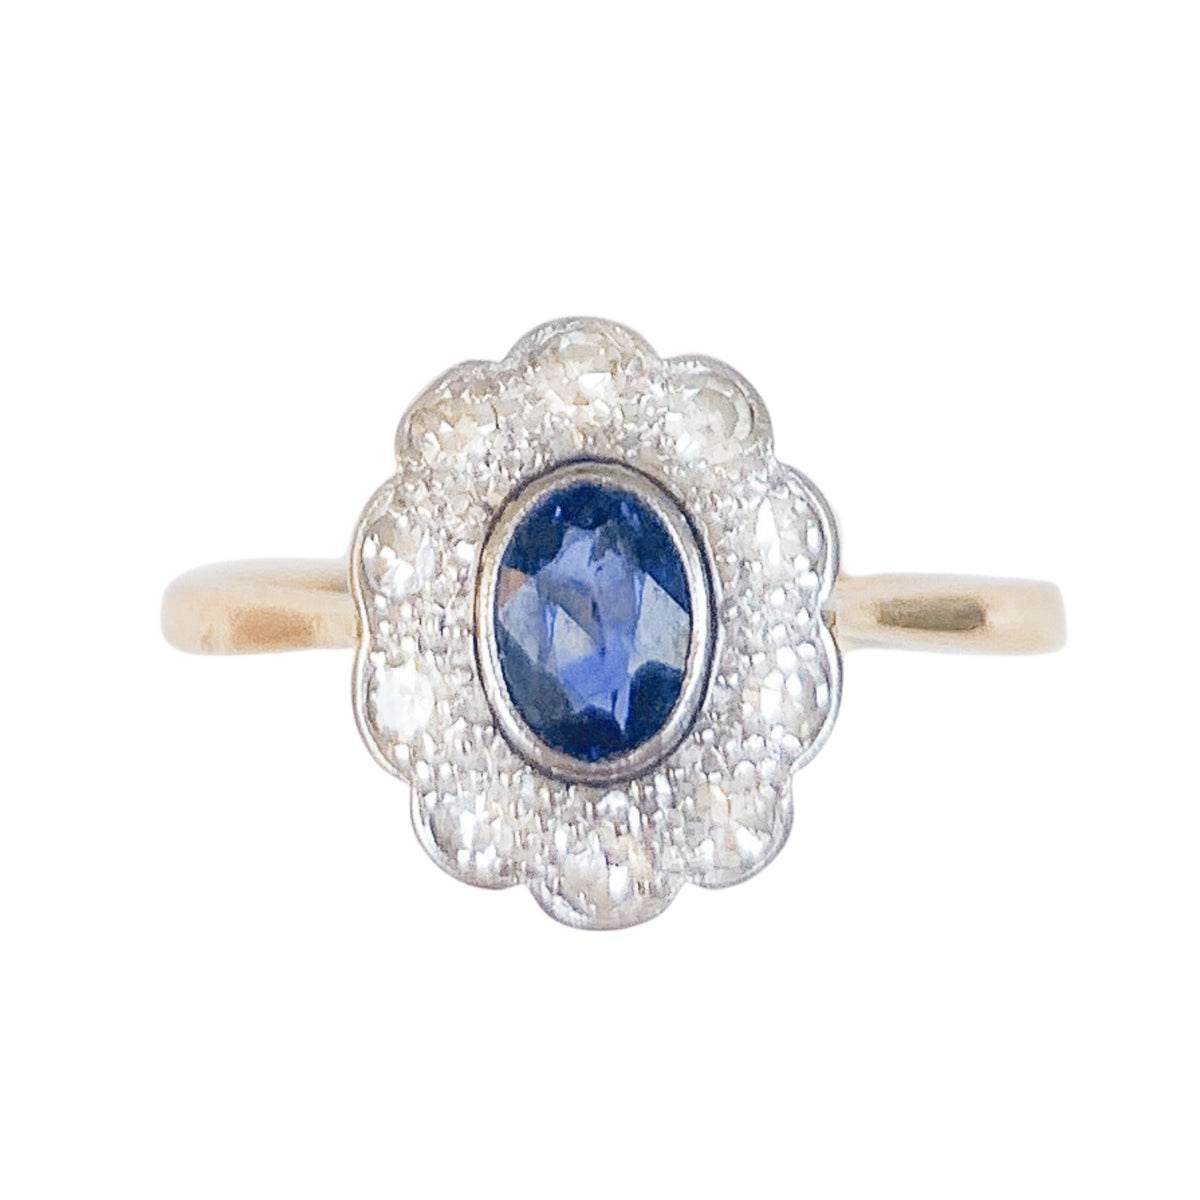 A Sapphire and Diamond ring